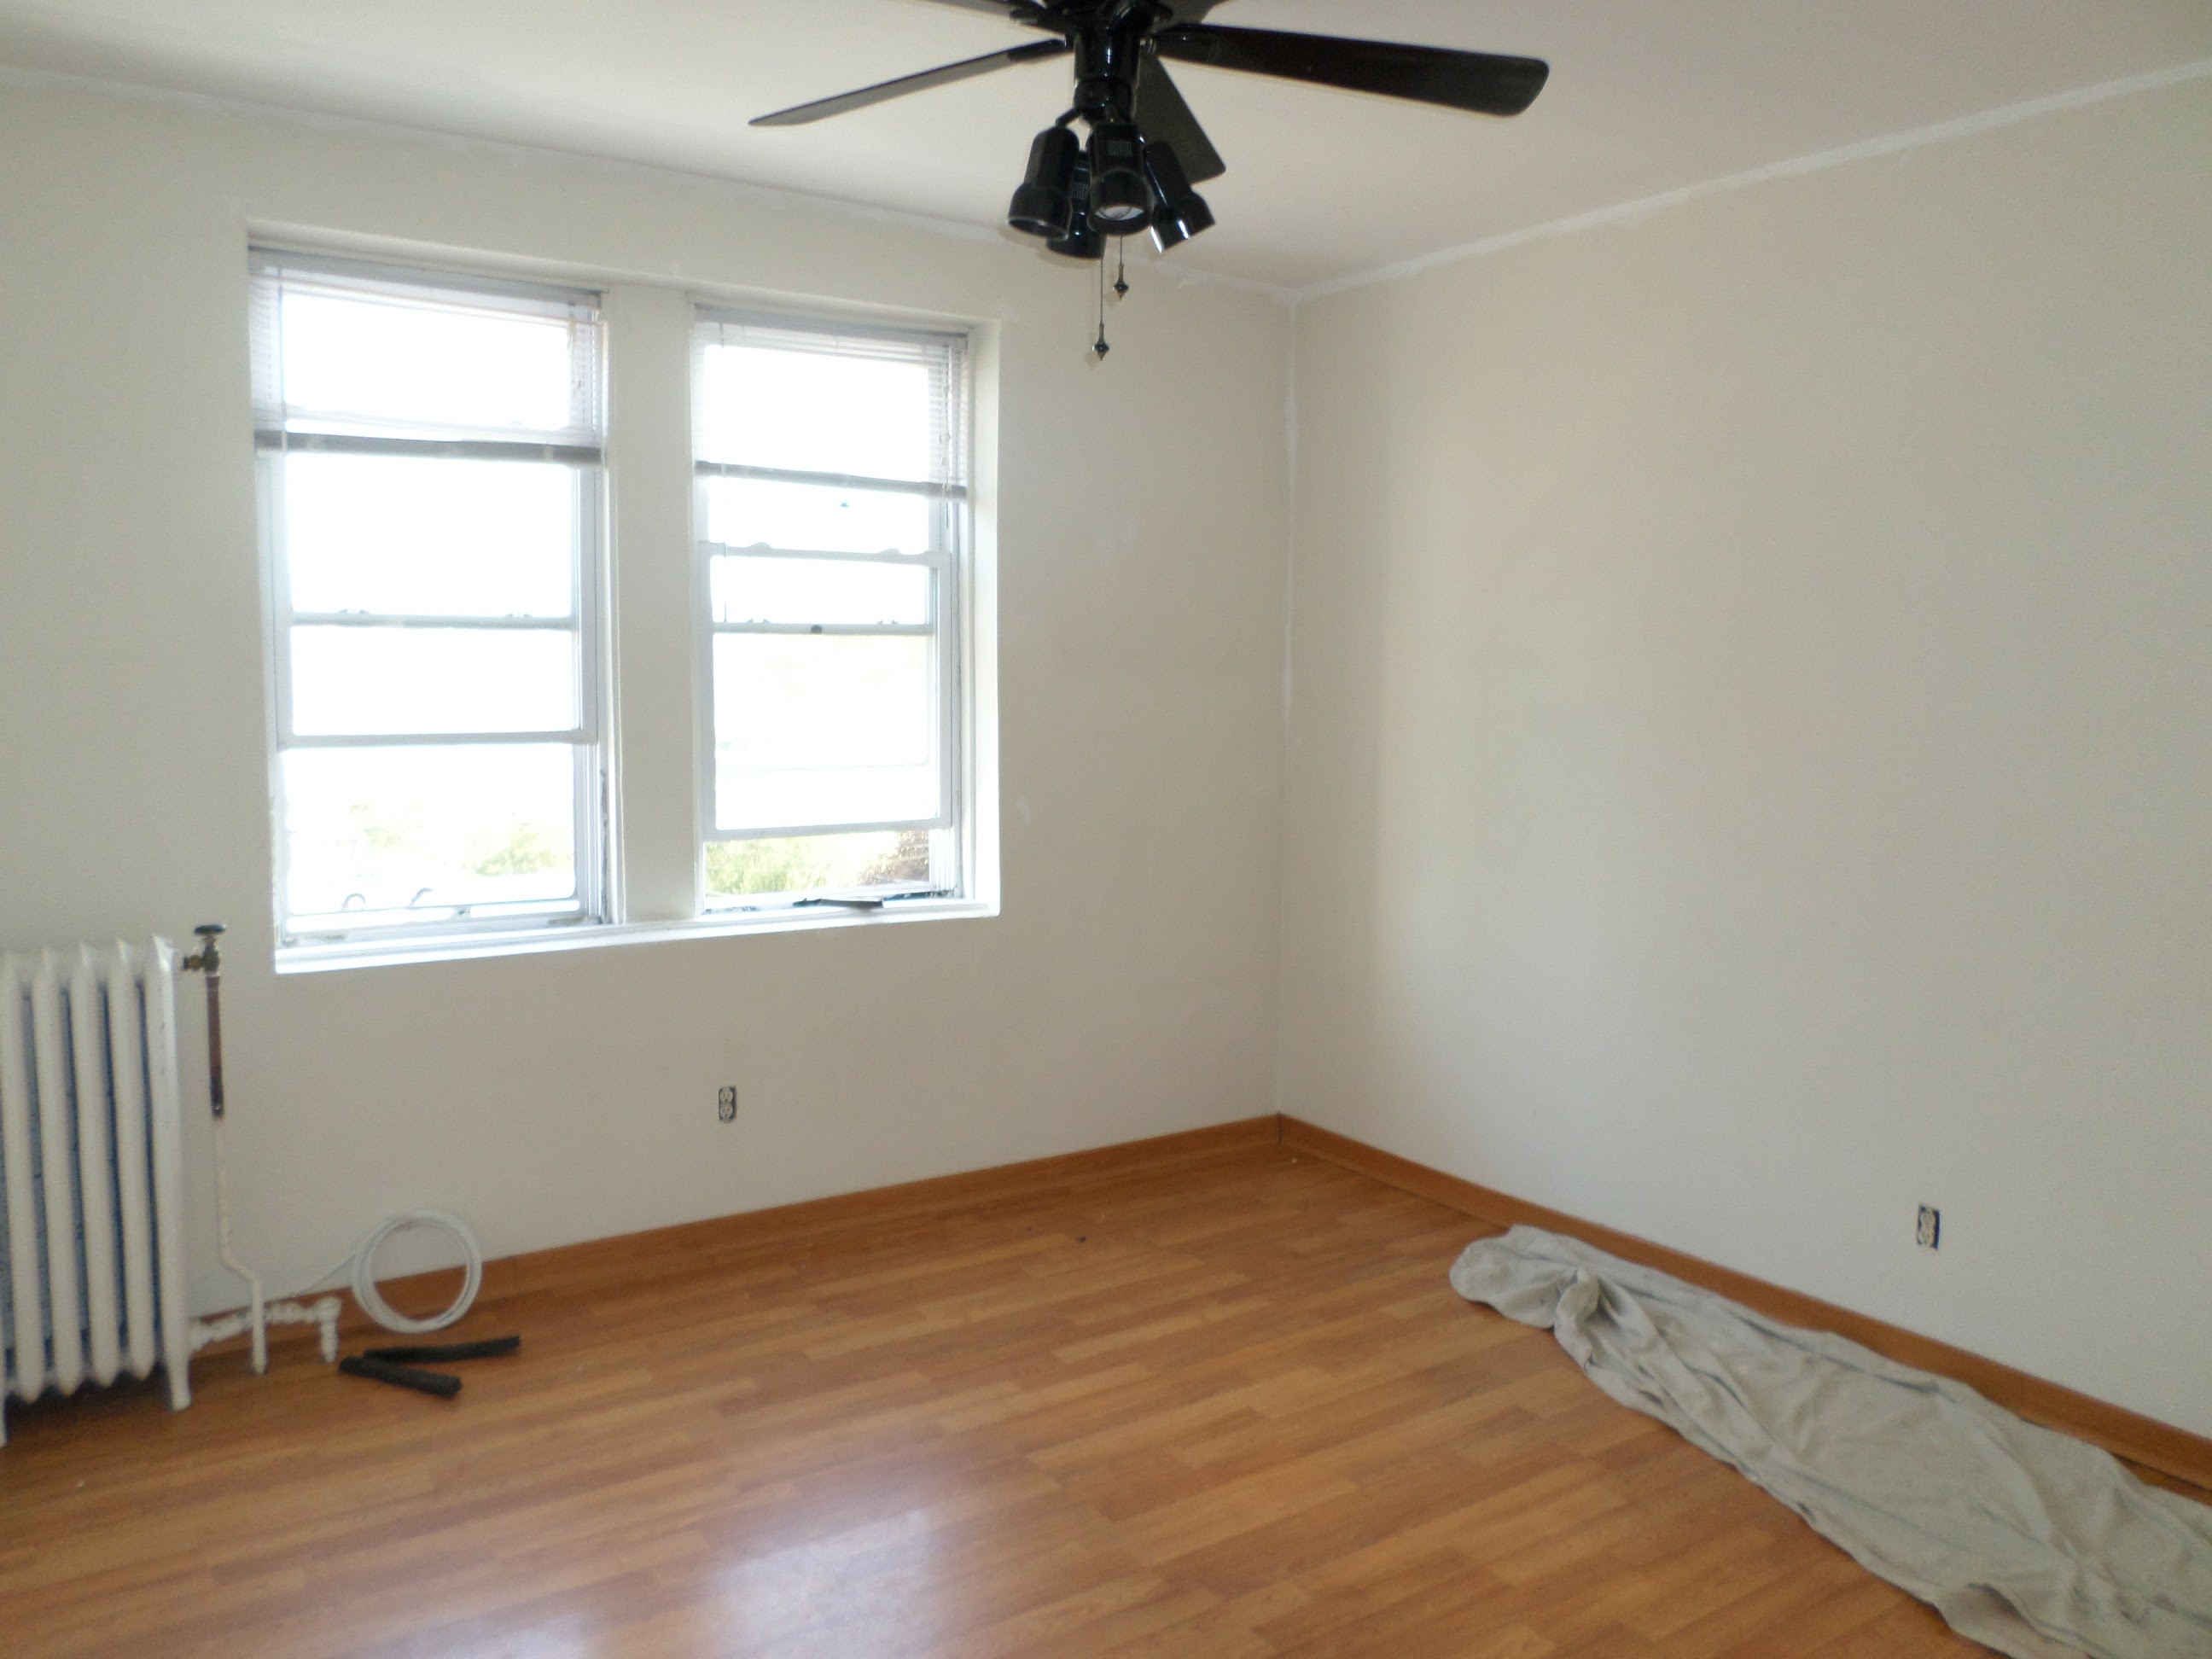 West New York - 2 Bedroom Apartment For Rent